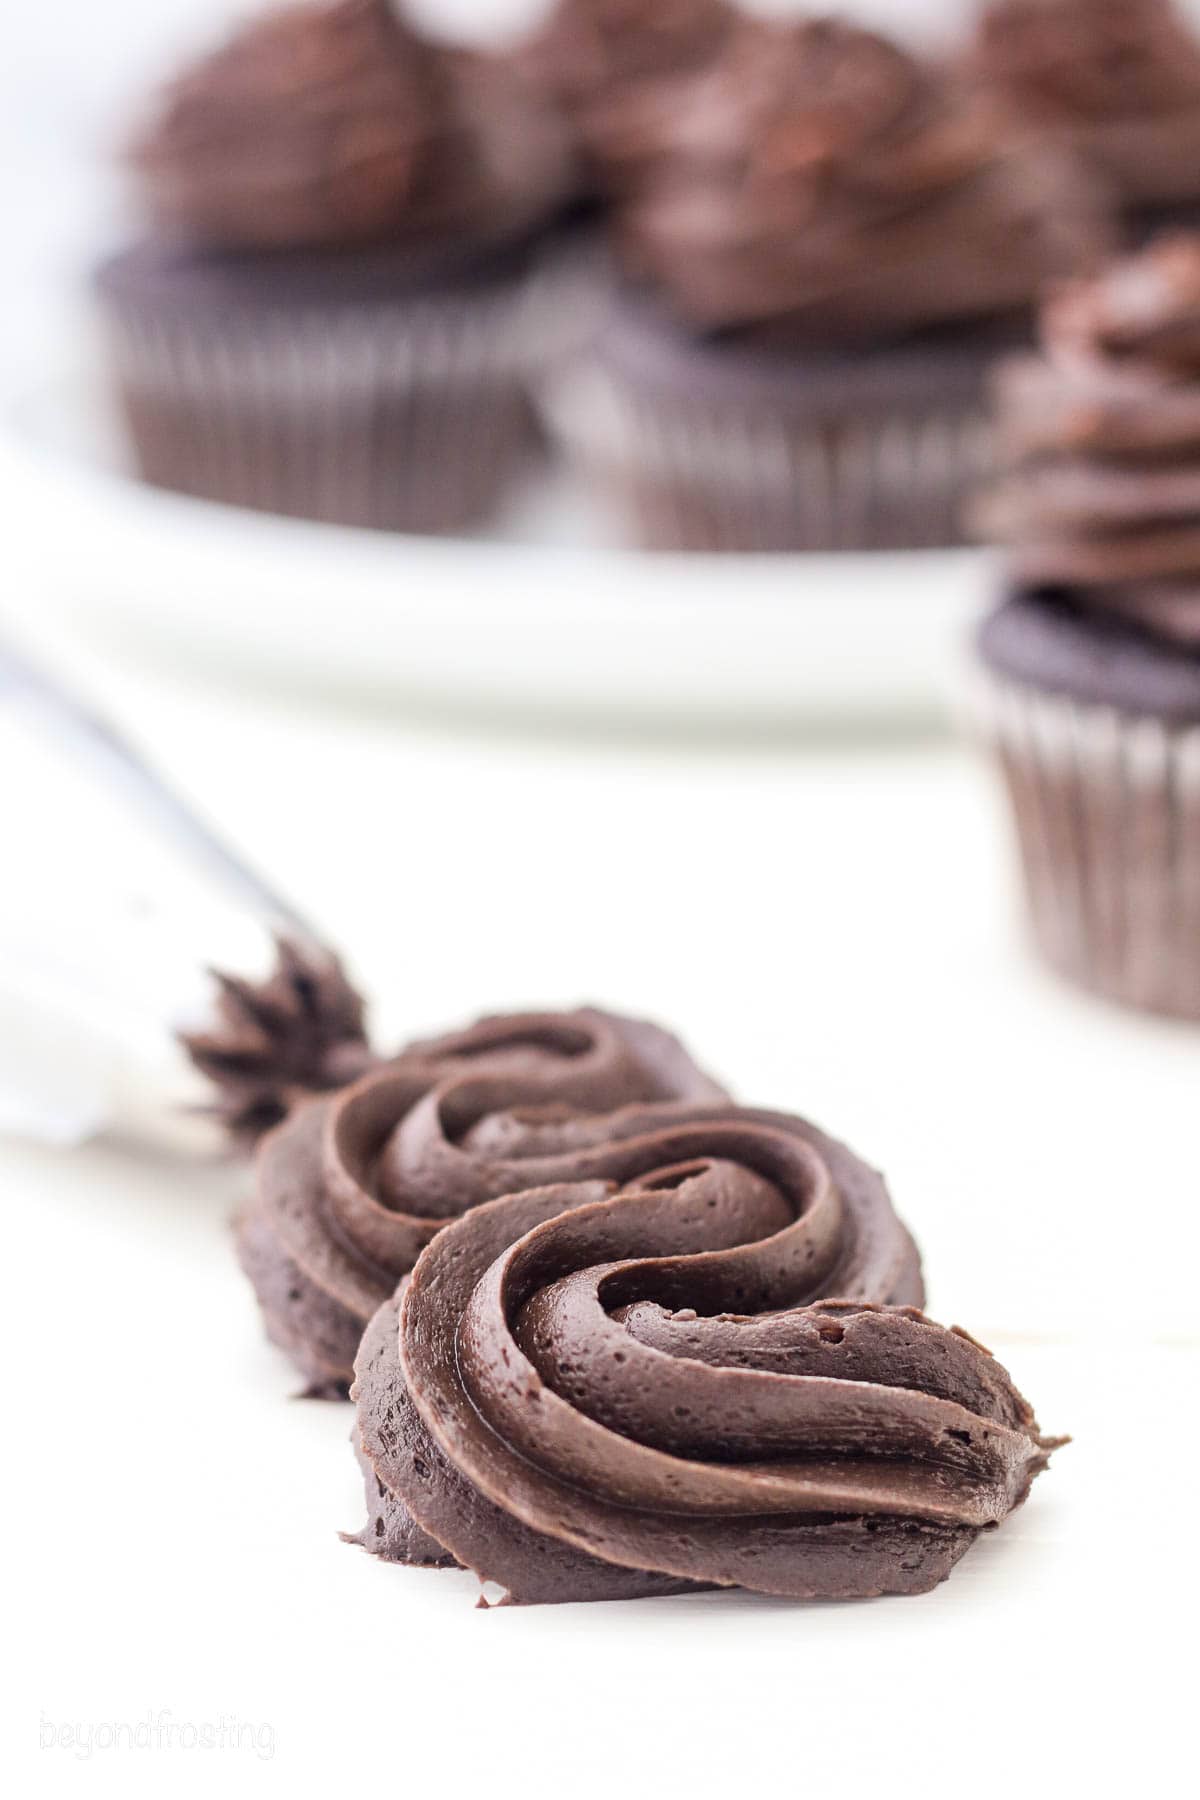 A piping tip pipes a squiggle of chocolate frosting onto a countertop.